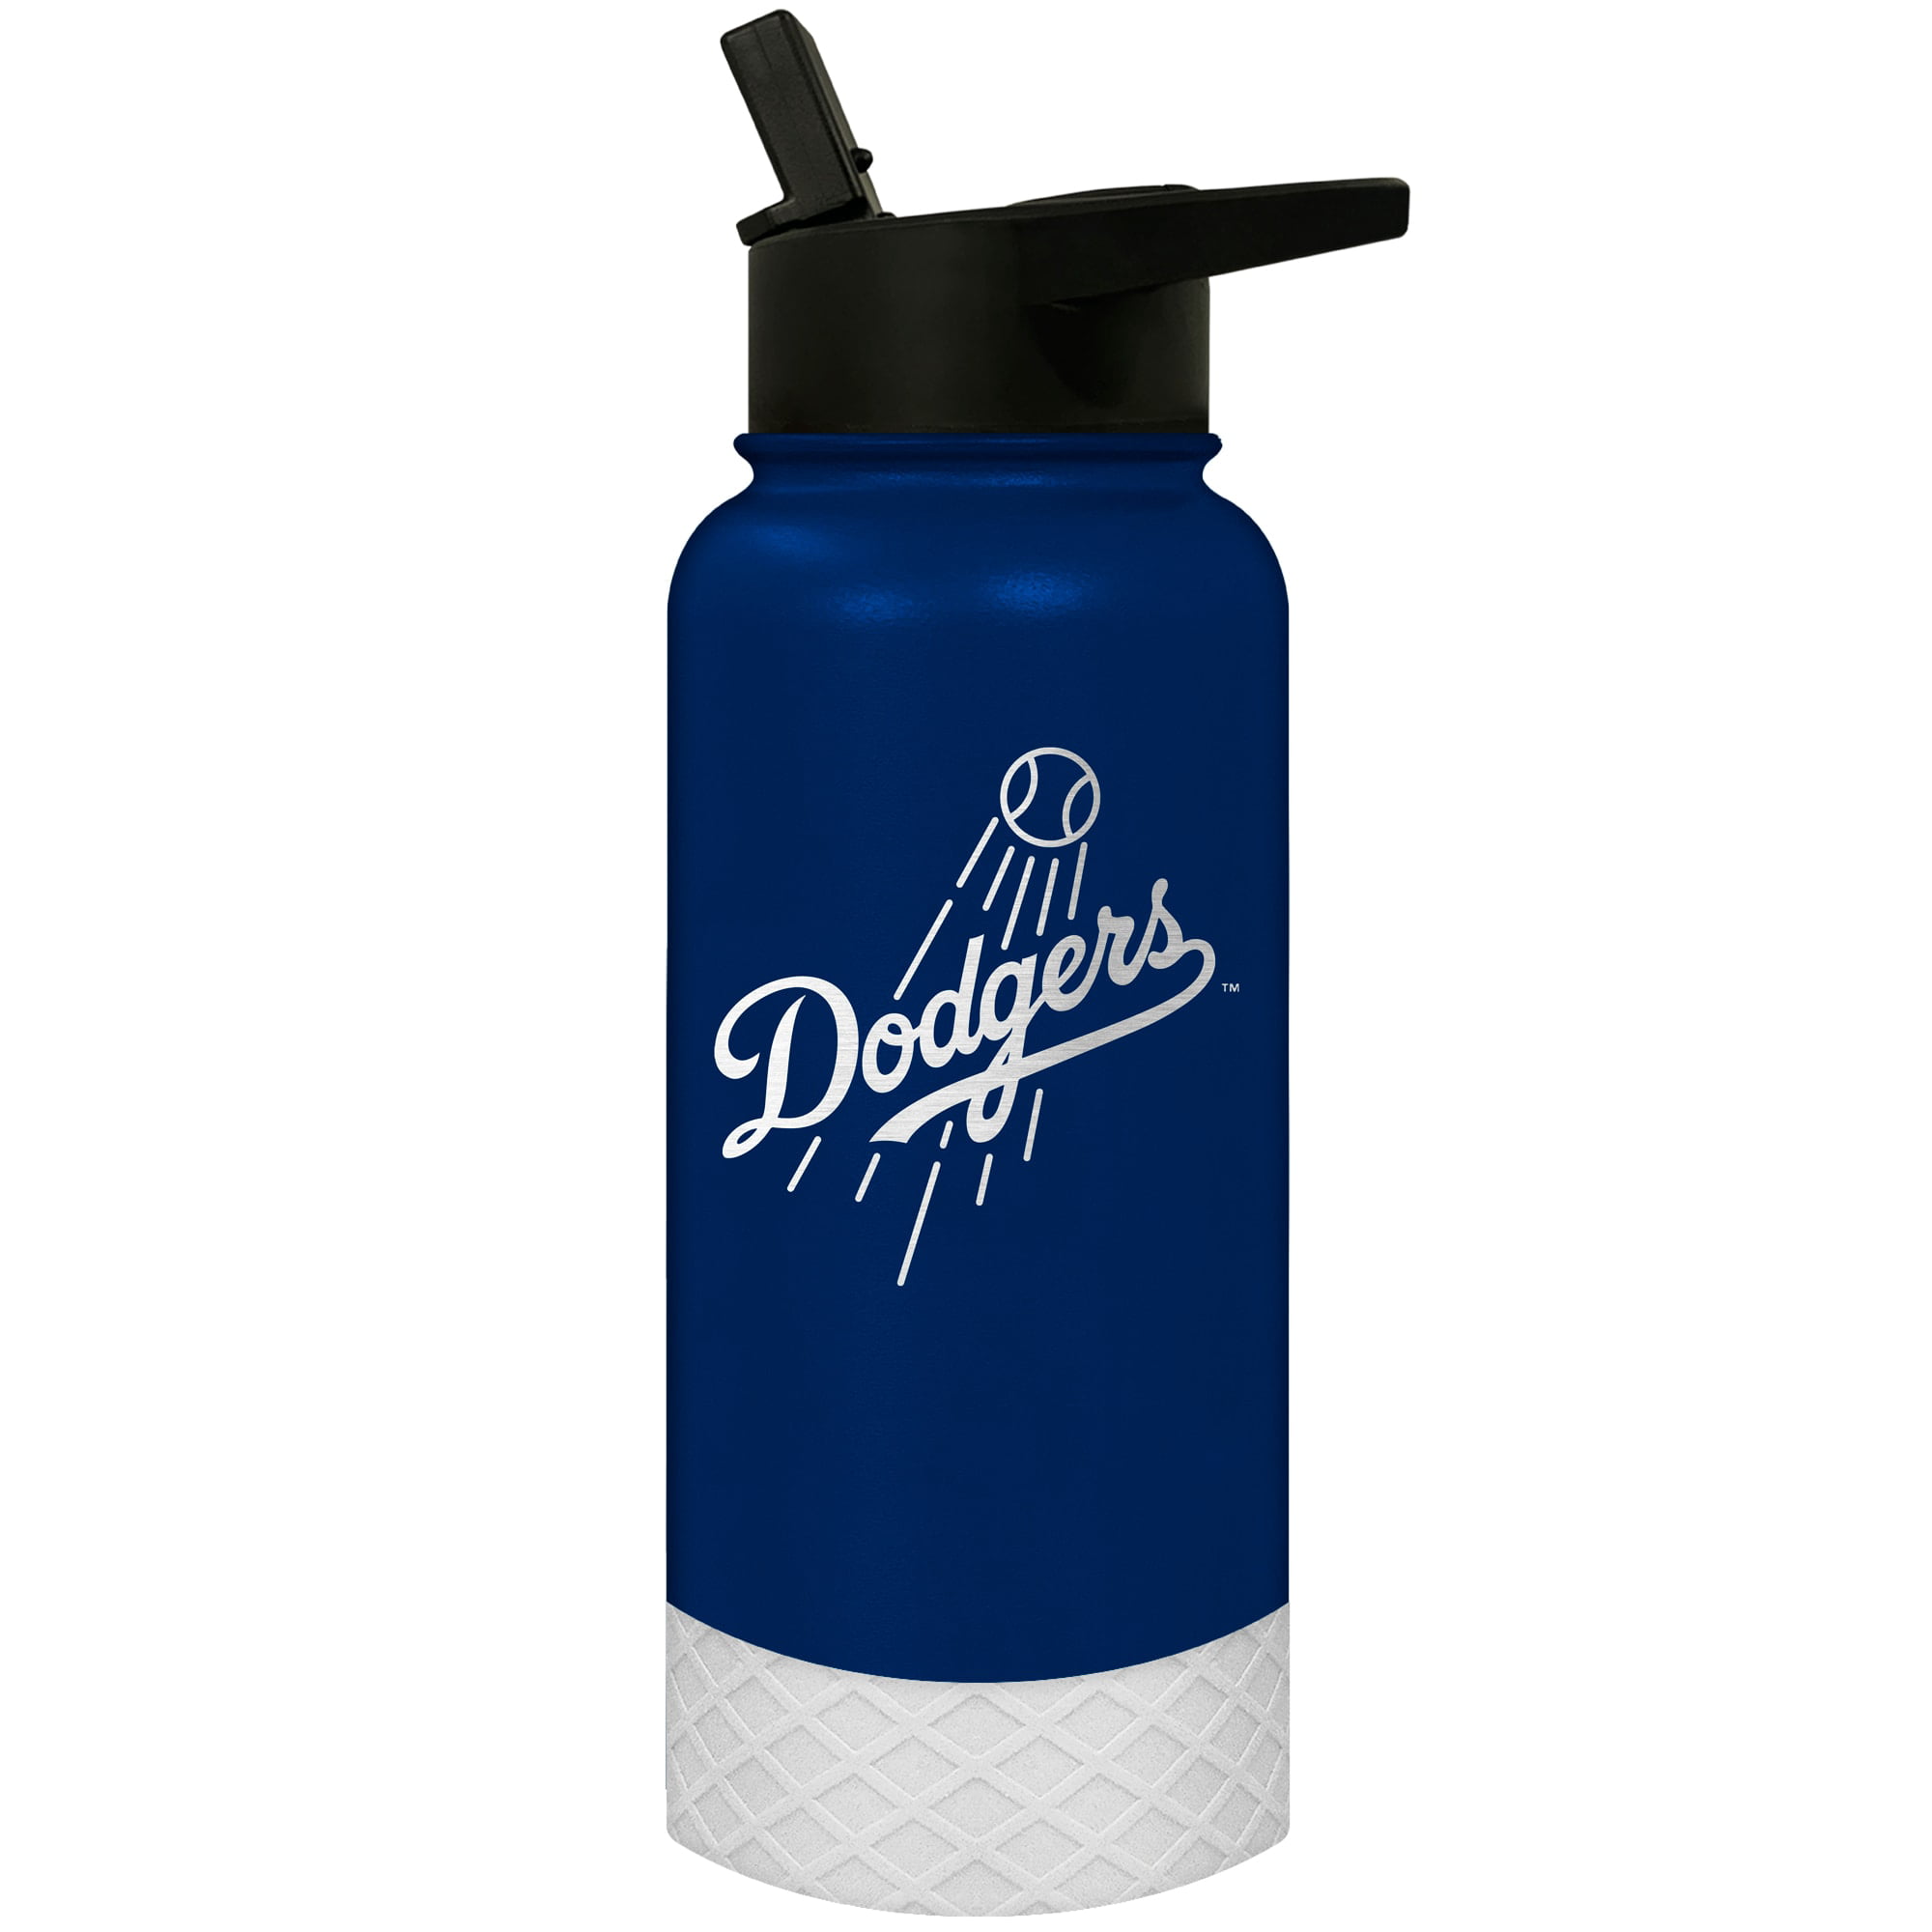 Great American Products 32 oz Blue and Black Los Angeles Dodgers MLB  Insulated Stainless Steel Water Bottle with Screw Cap and Flip-Top Lid 